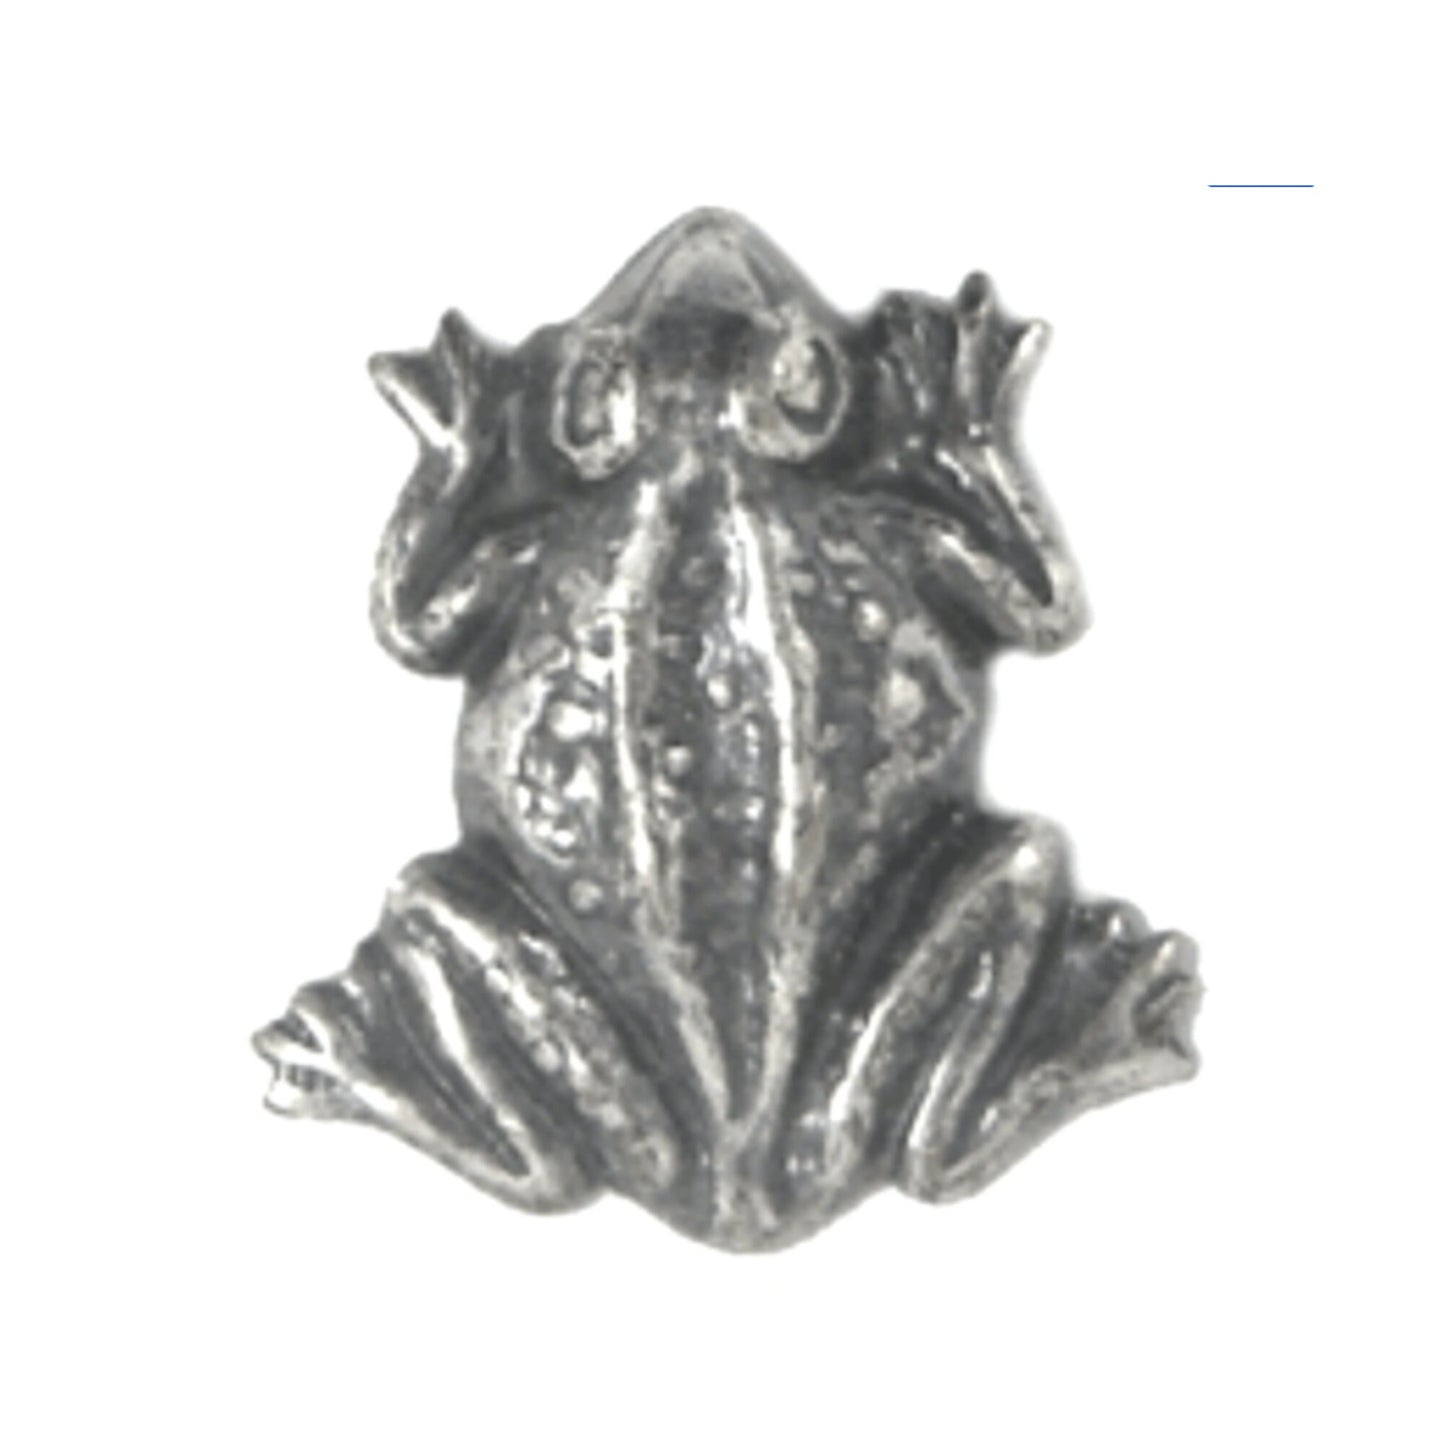 18mm x 19mm Frog Metal Charm Stamping, Antique Gold or Classic Silver, Made in USA, Pack of 6